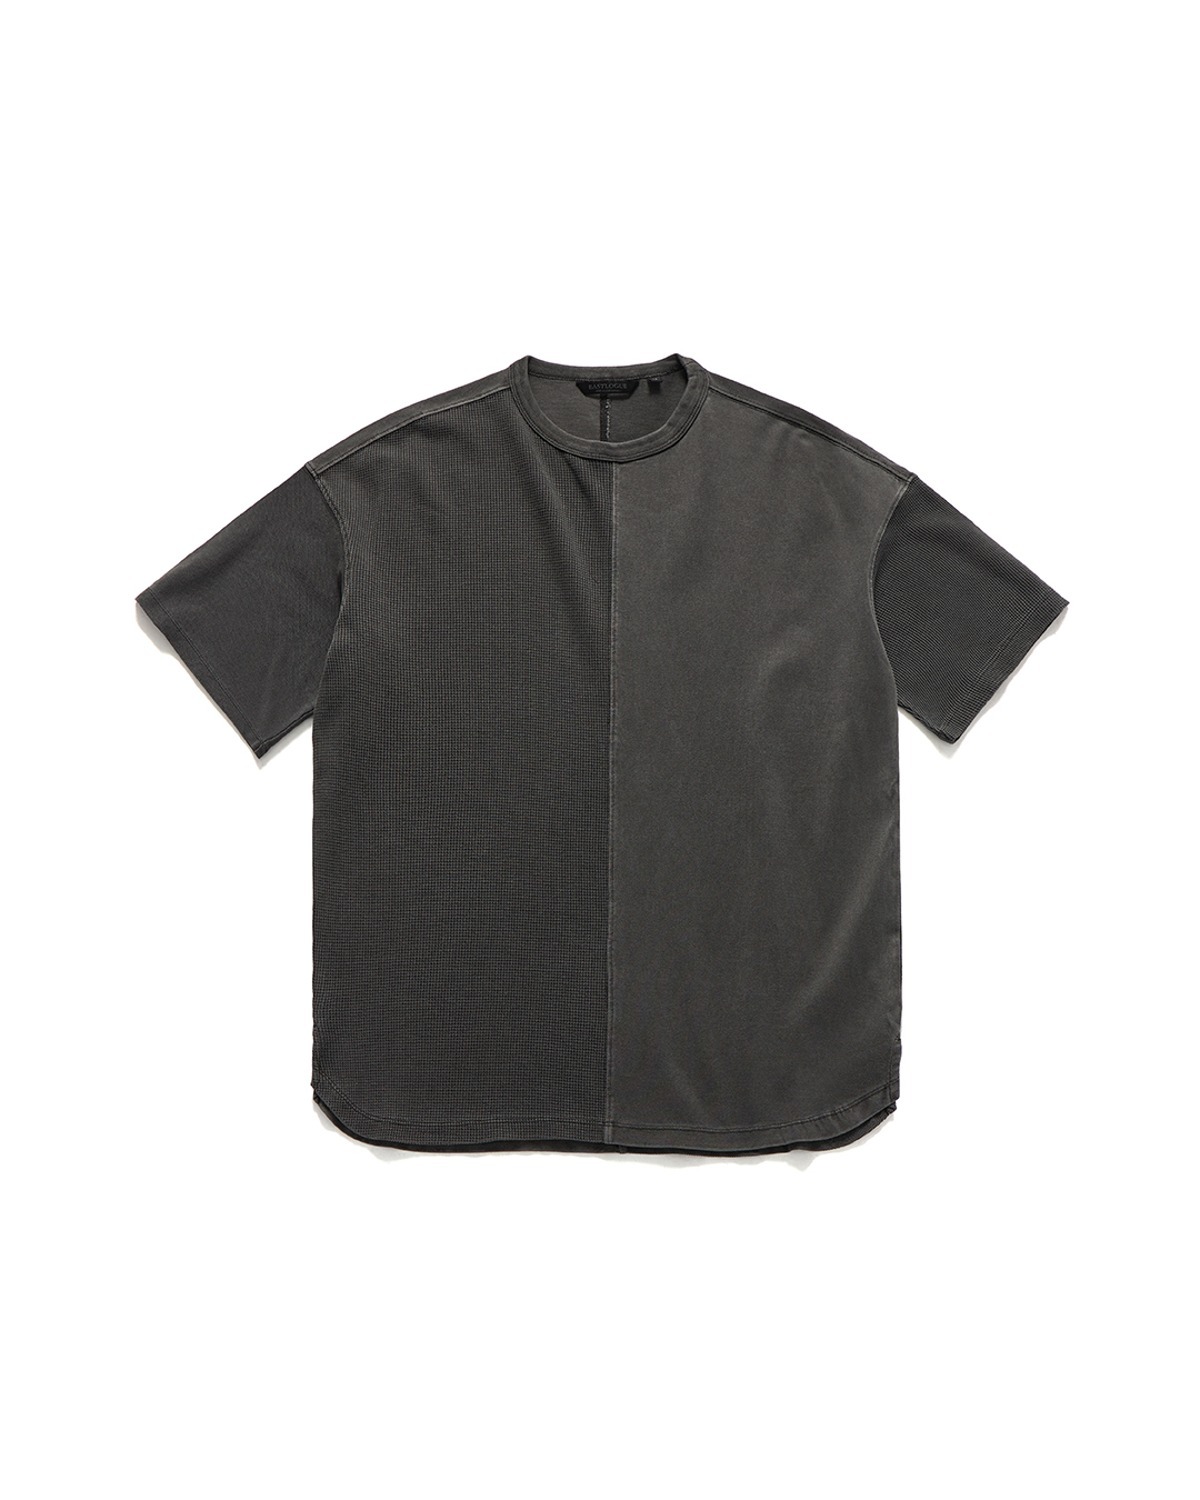 MULTI-FABRIC LOOSE FIT T-SHIRT / CHARCOAL